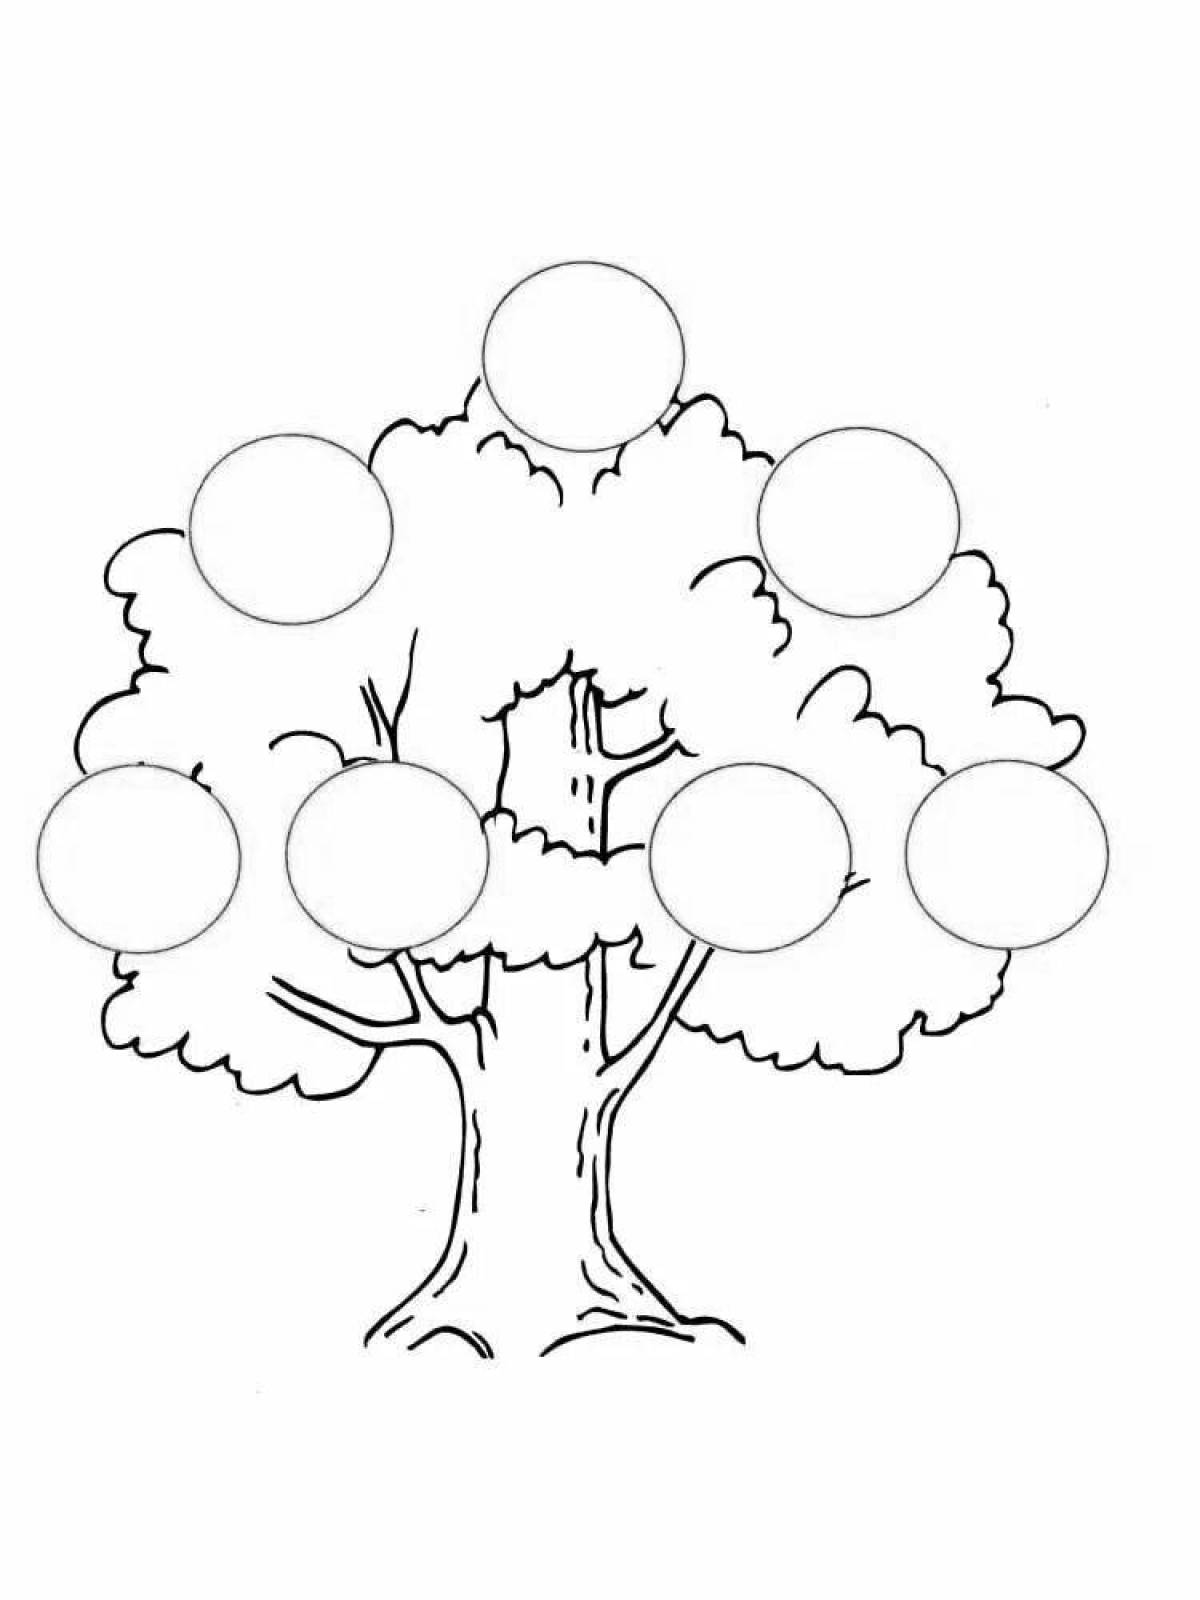 Rampant family tree coloring page